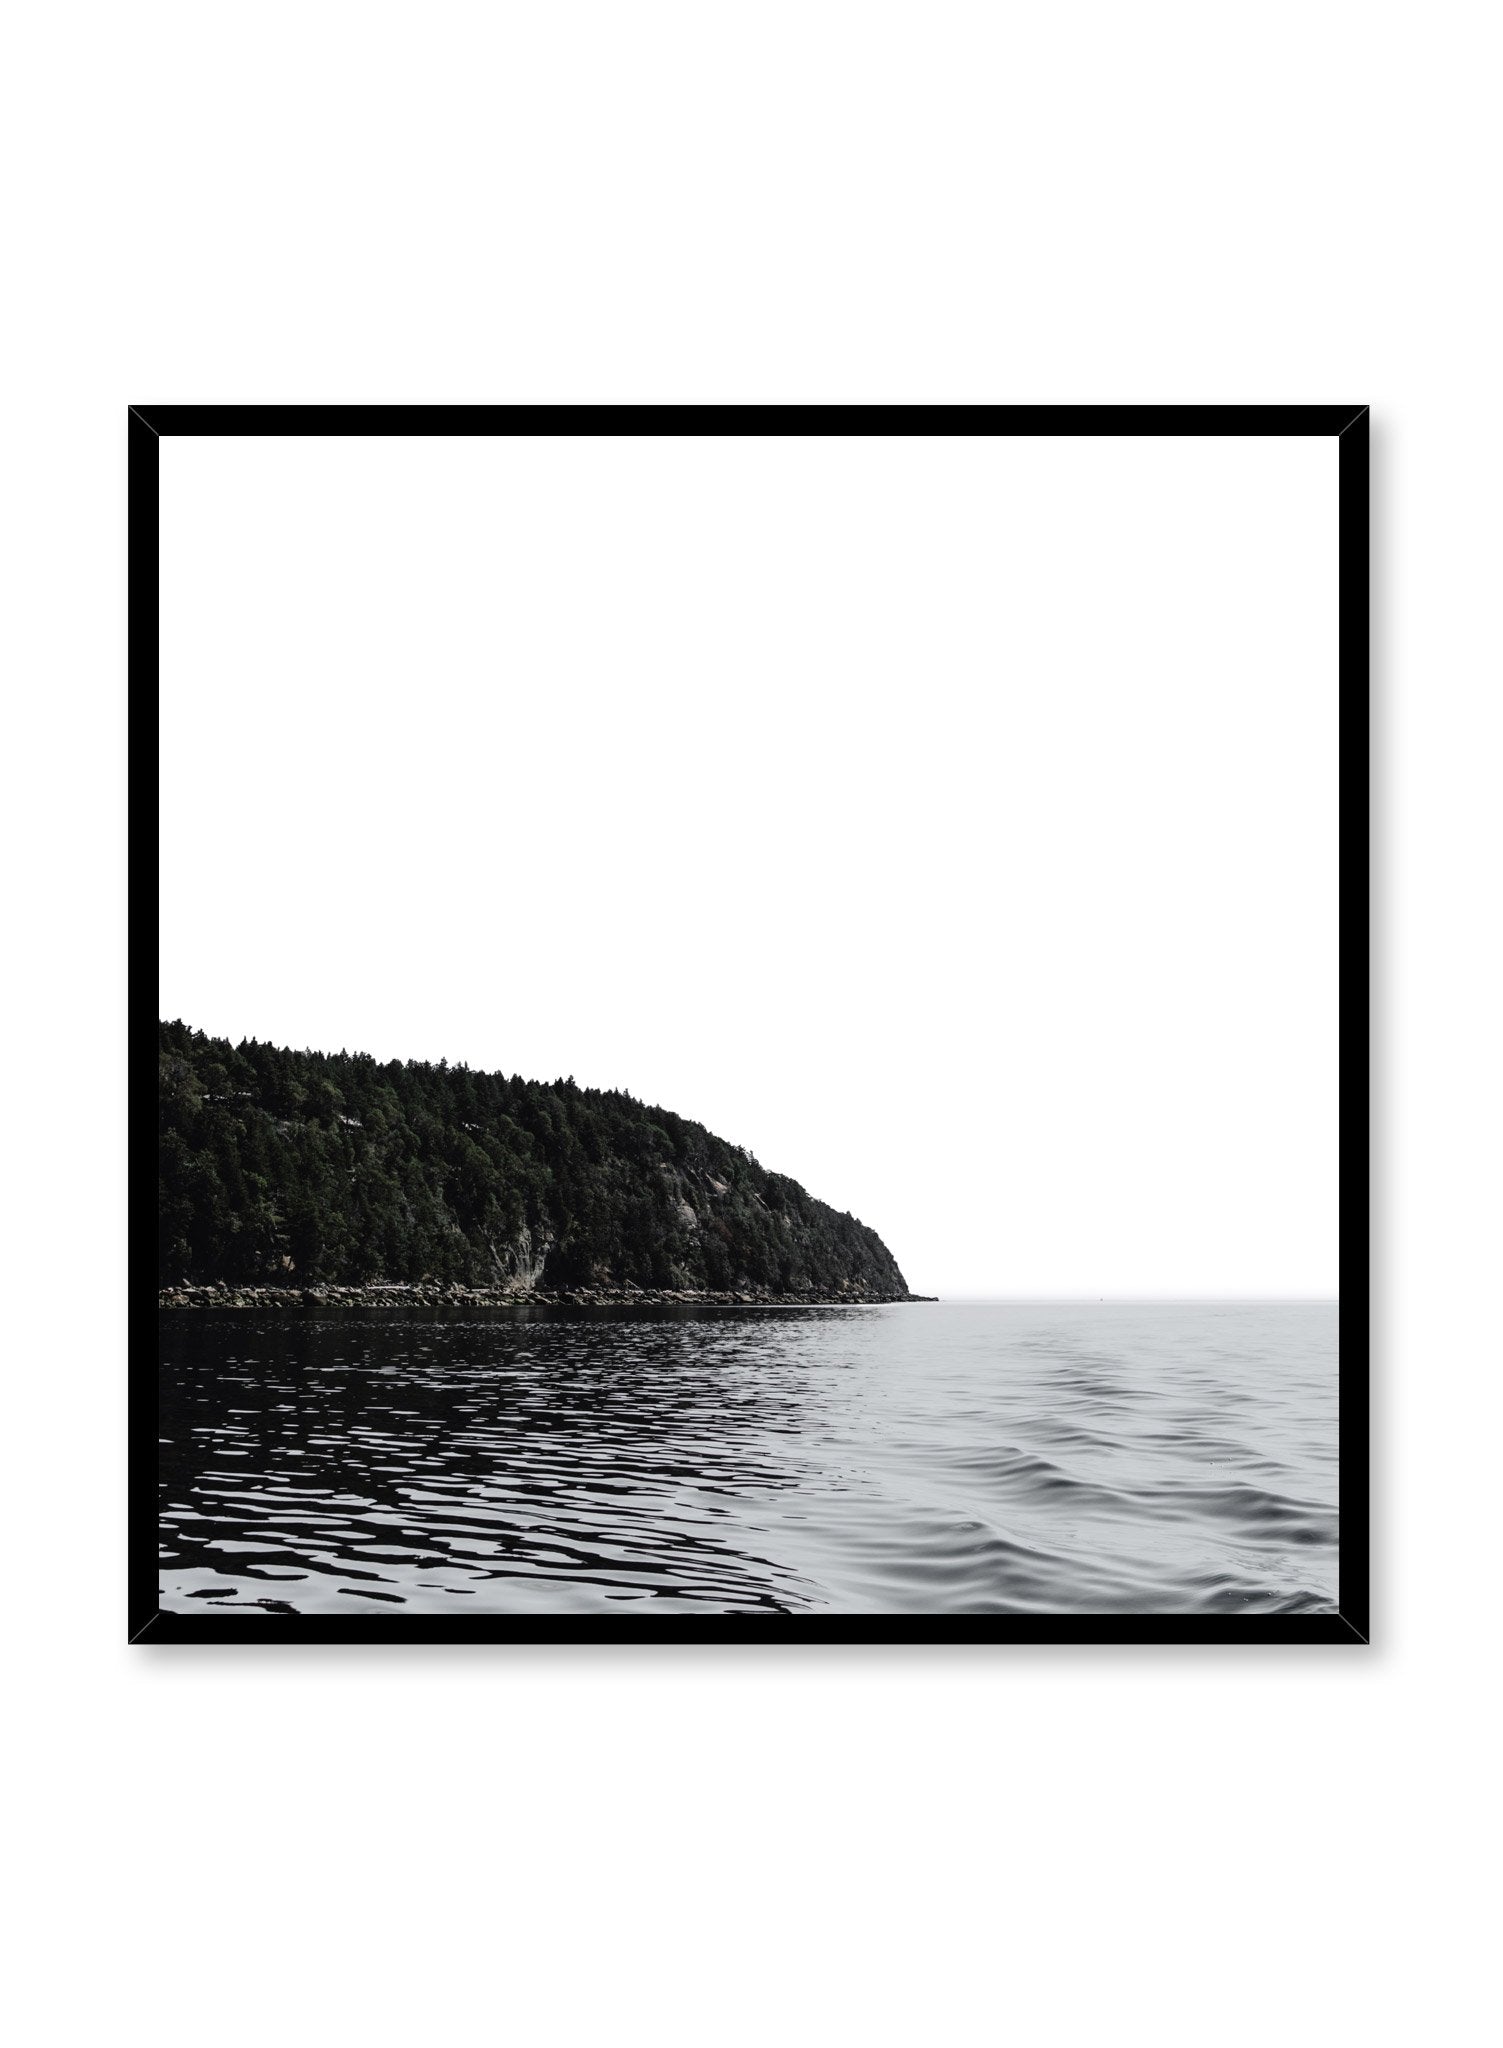 Minimalist design poster by Opposite Wall with nature photography of Vancouver Island and ocean in square format